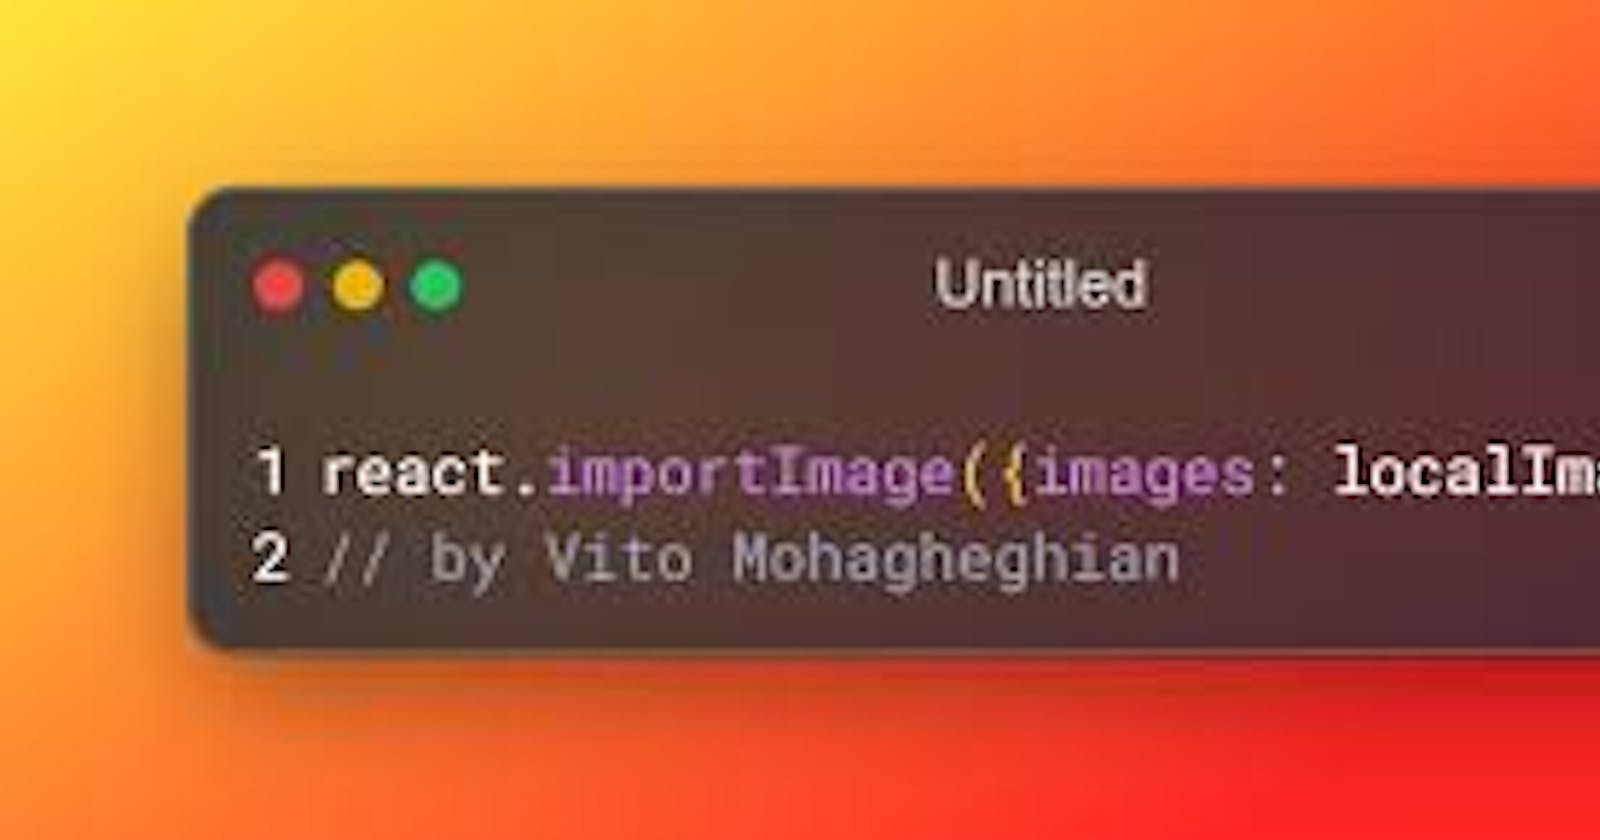 Simple steps for importing an image in a React app